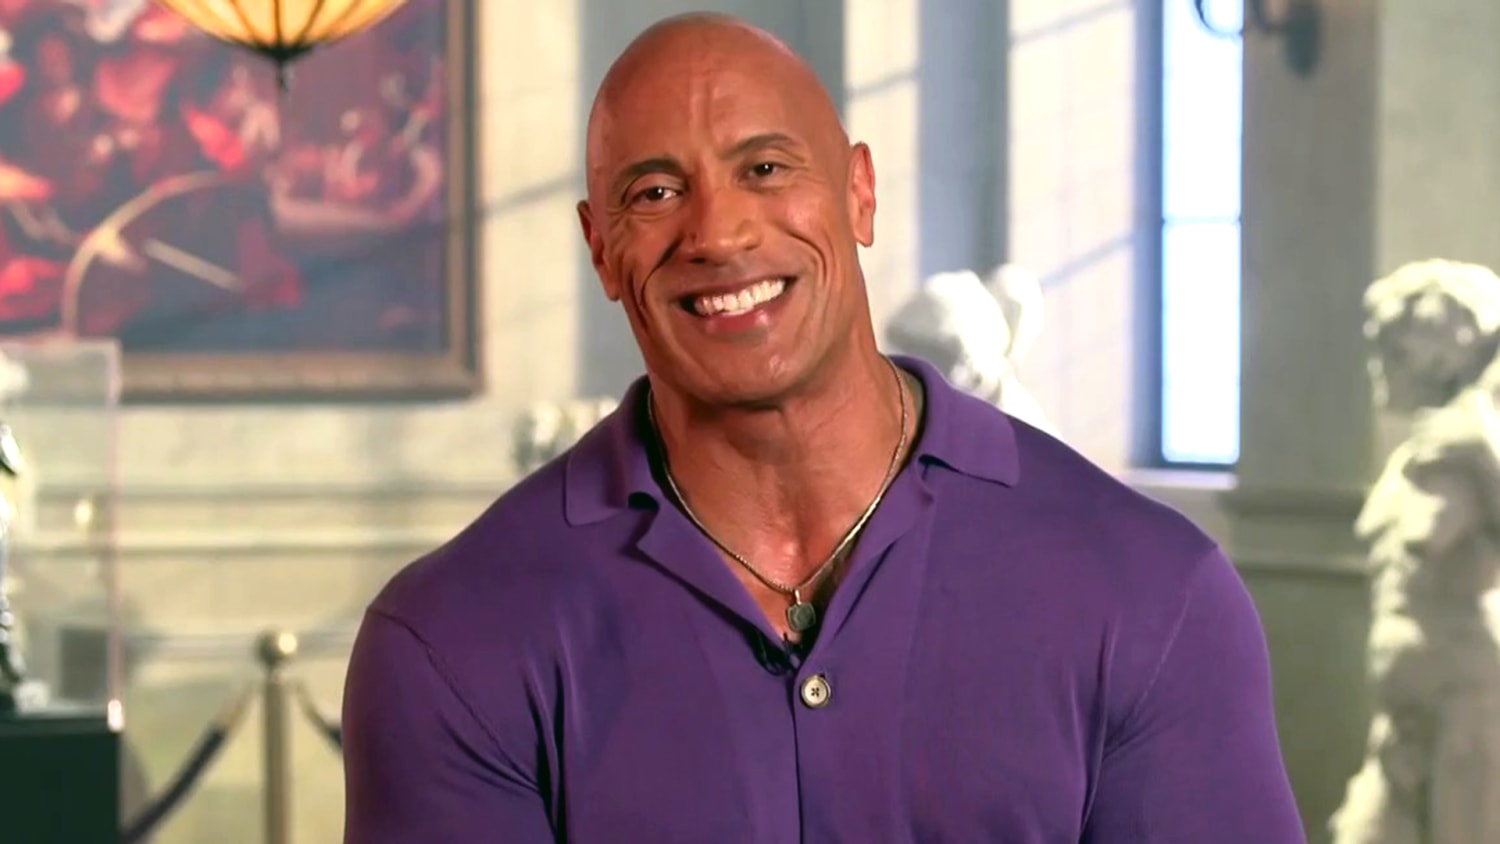 Dwayne 'The Rock' Johnson posts message of support for Parma PACT students